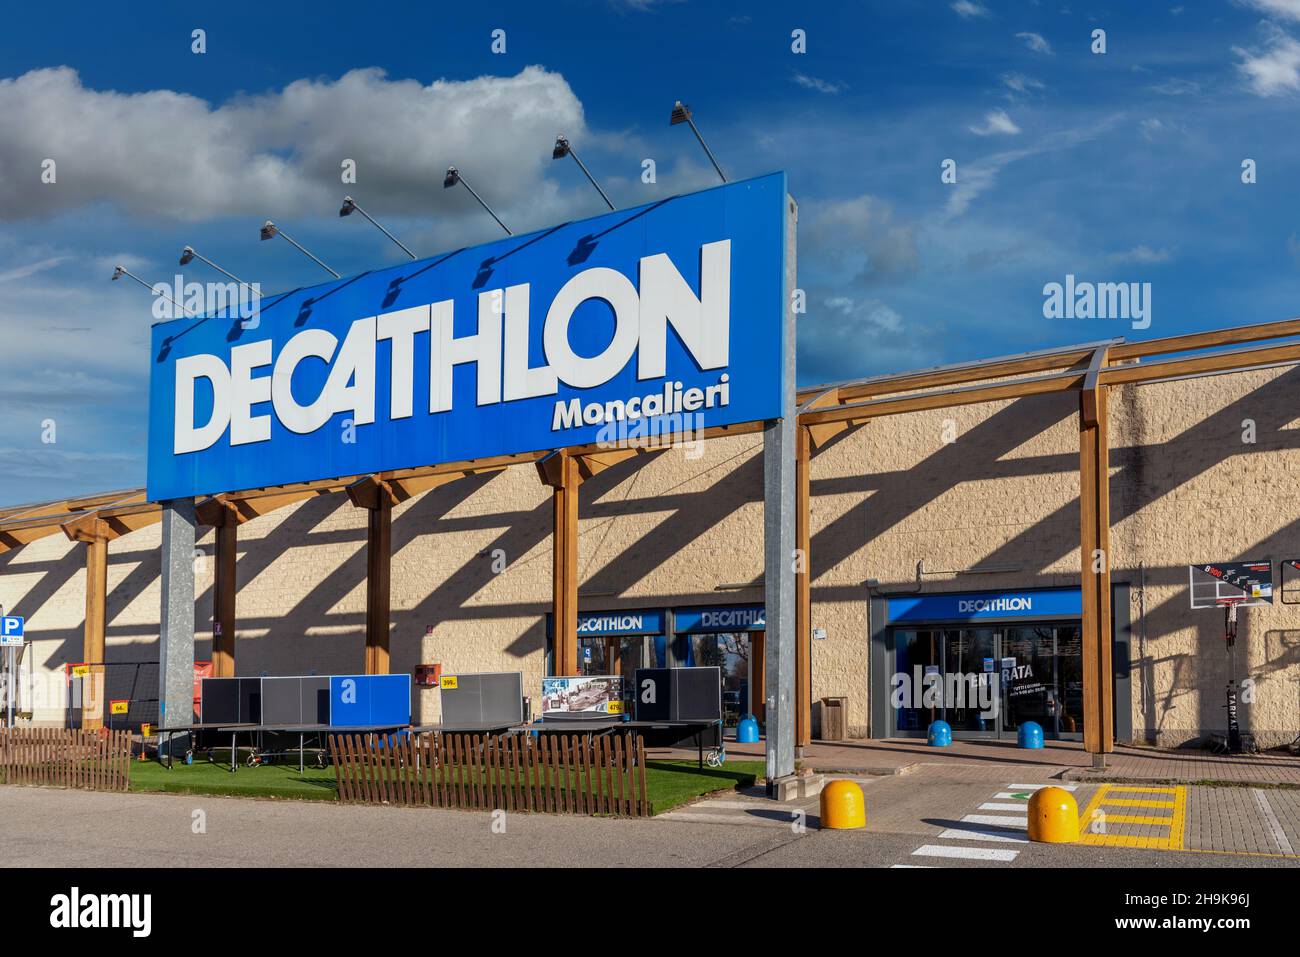 Sep 20, 2019 San Francisco / CA / USA - Exterior View of Decathlon Sporting  Goods Store, in South of Market District in Downtown Editorial Image -  Image of equipment, exterior: 159220025